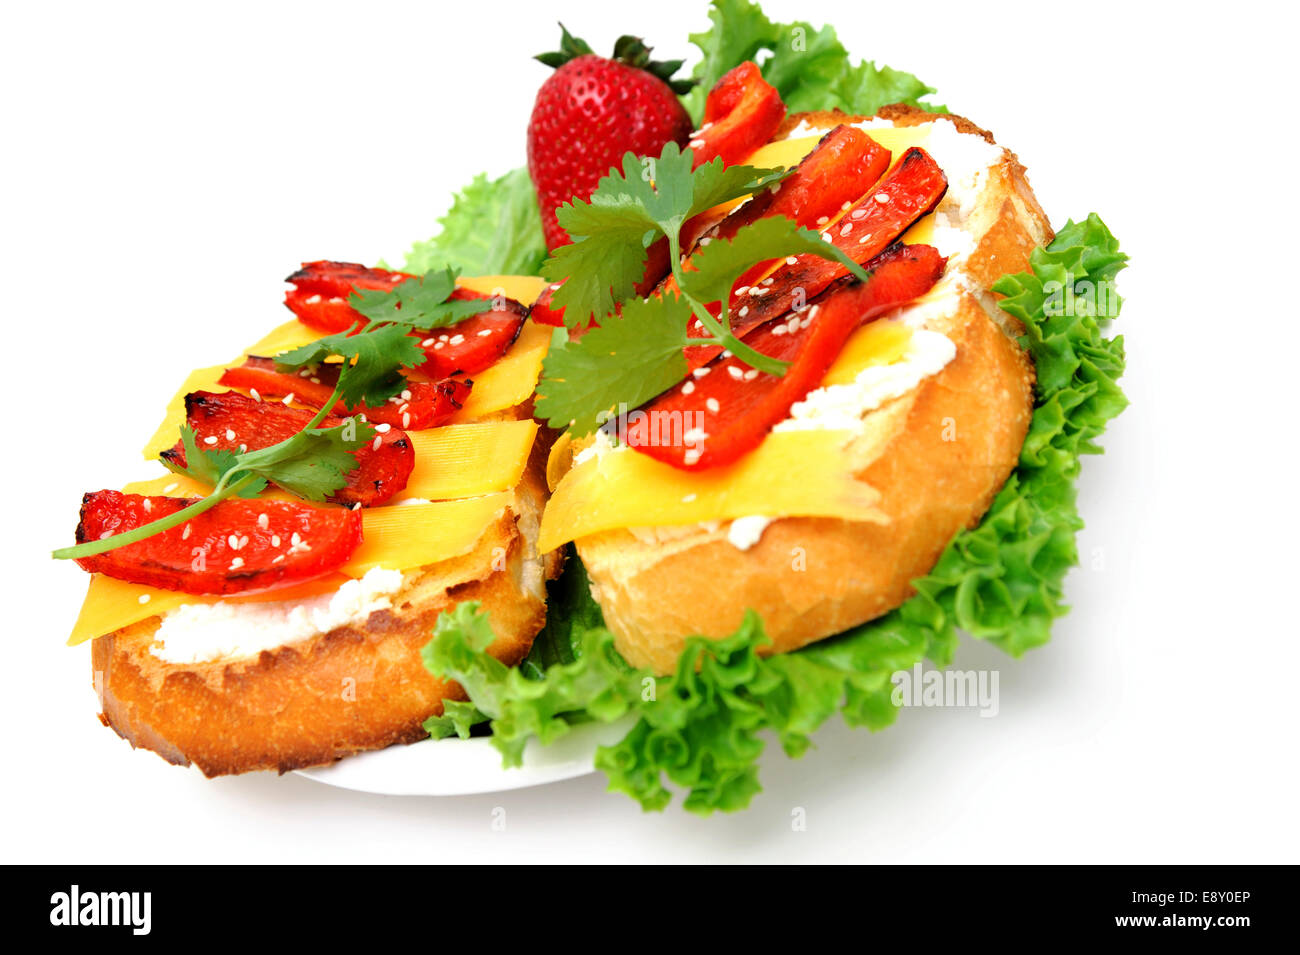 Cheese And Red Pepper Sandwich Stock Photo